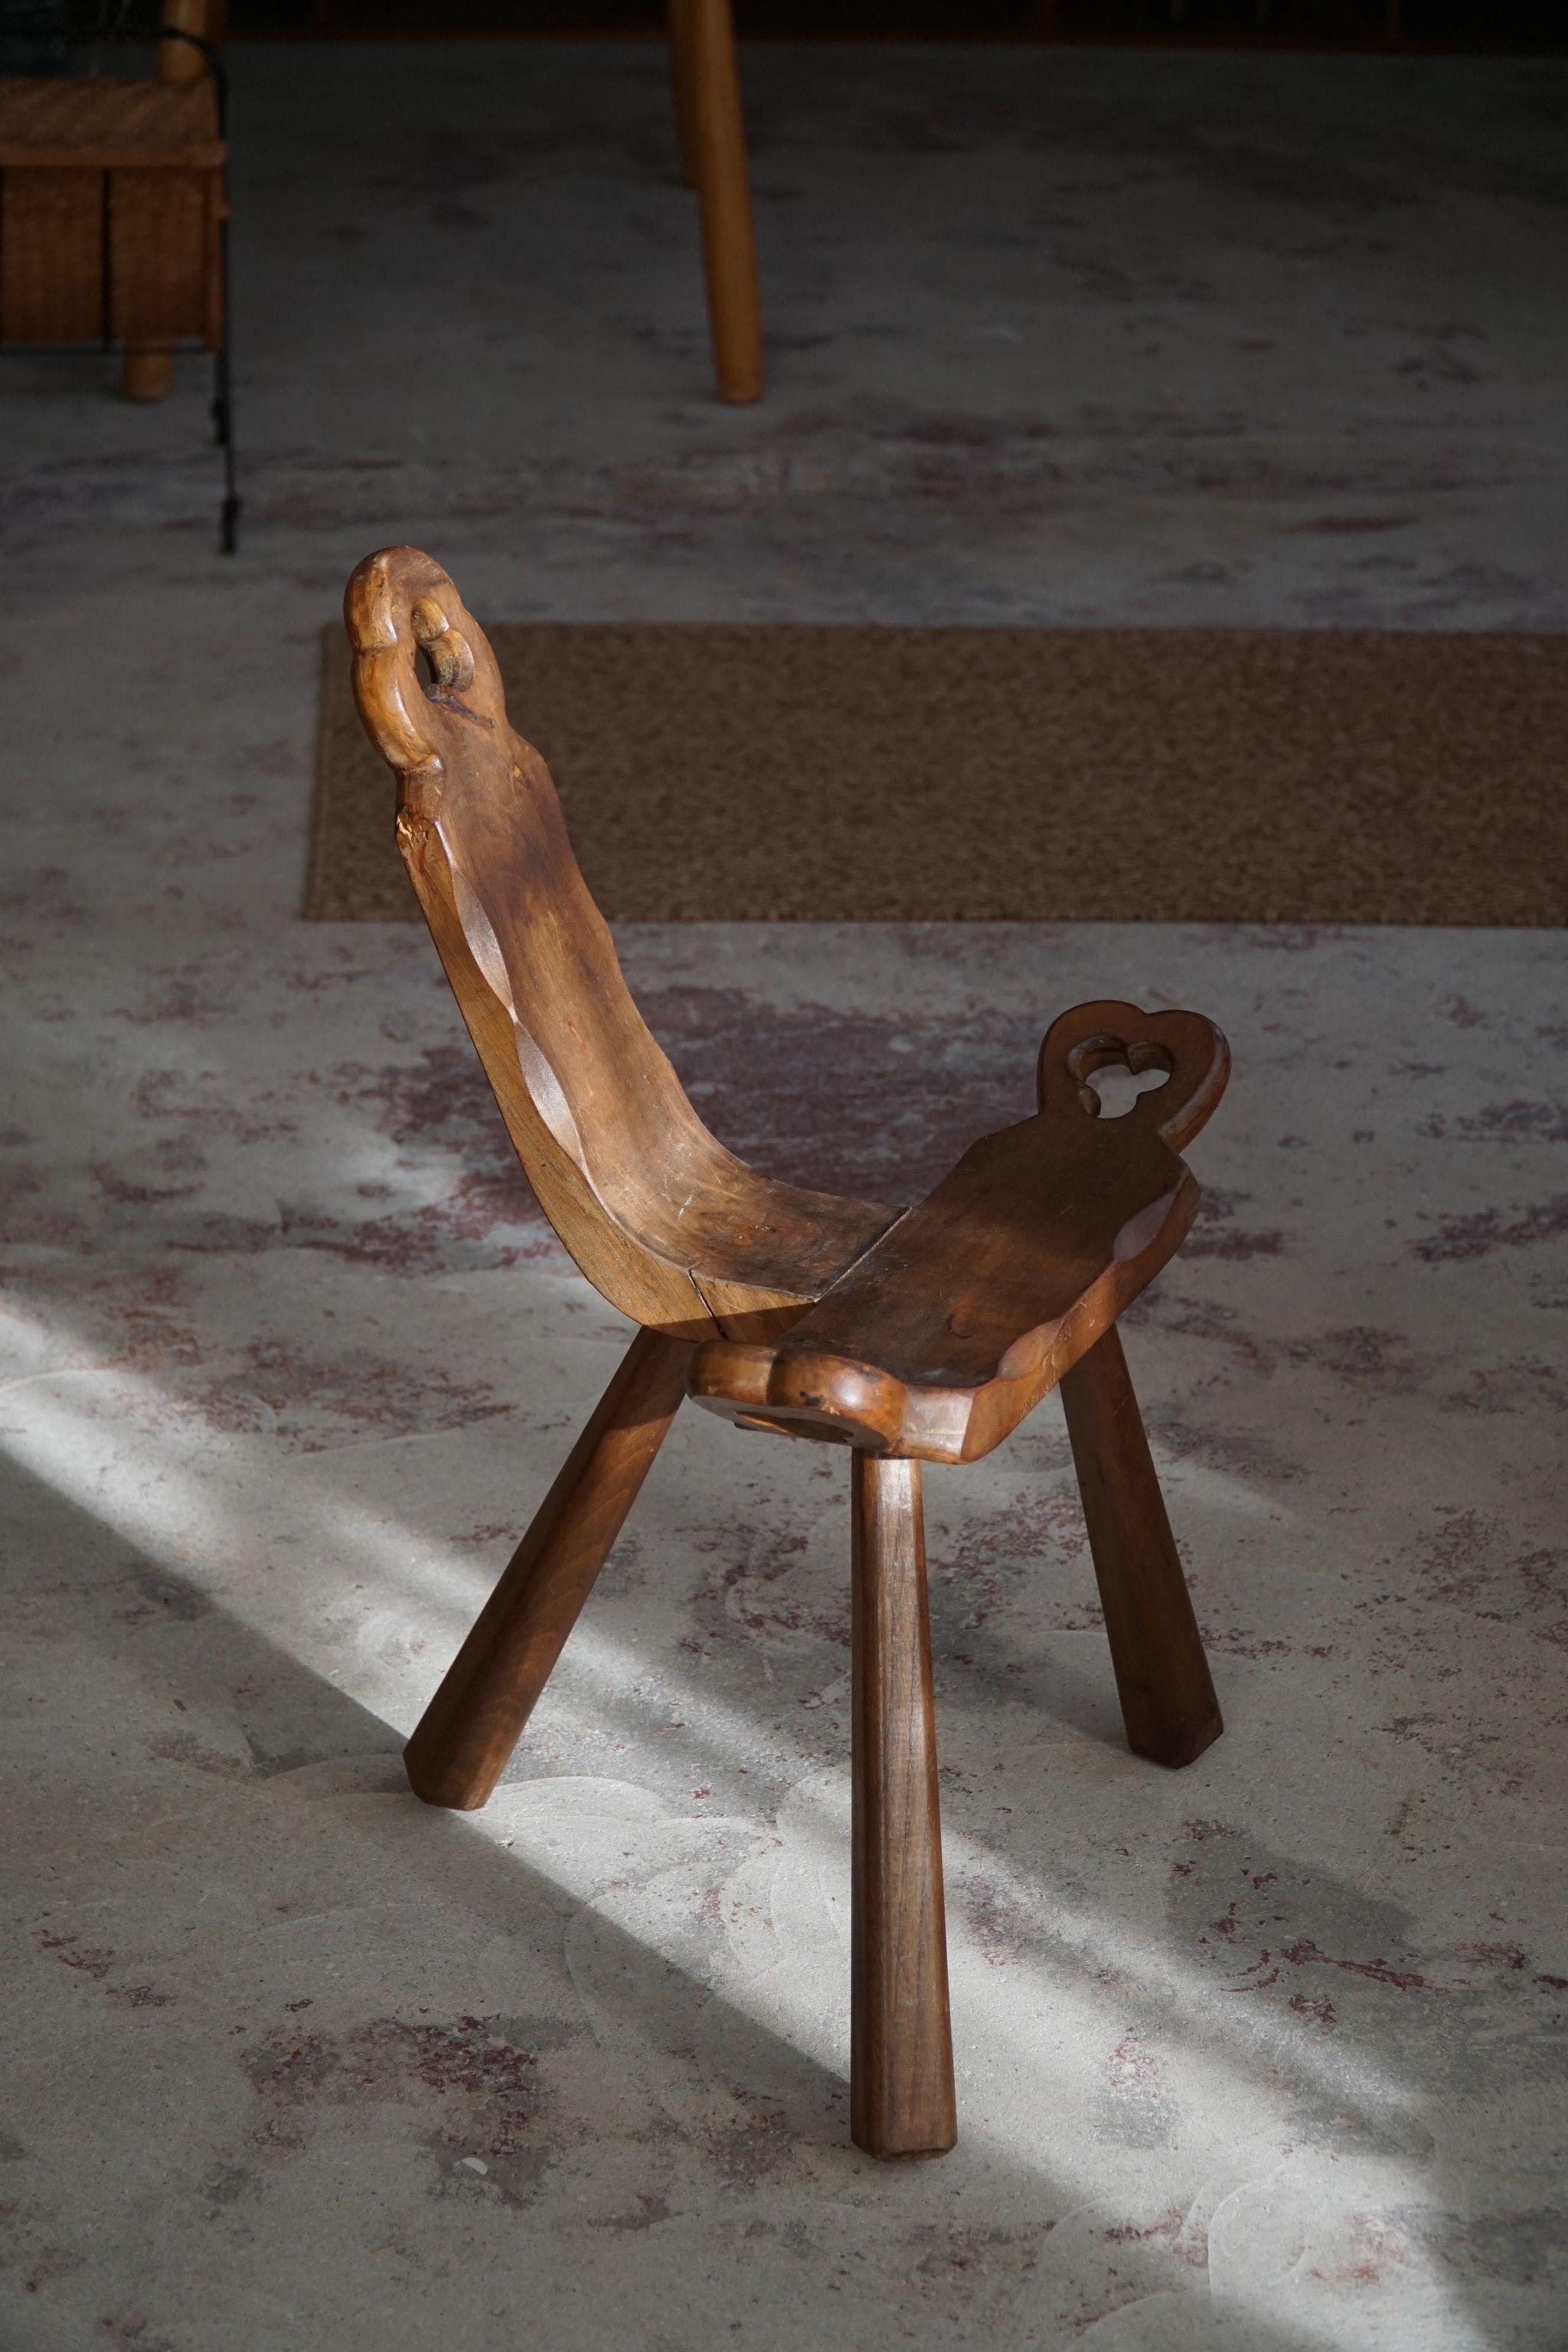 Primitive French Wooden Carved Tripod Chair, Wabi Sabi Style, Early 20th Century For Sale 7